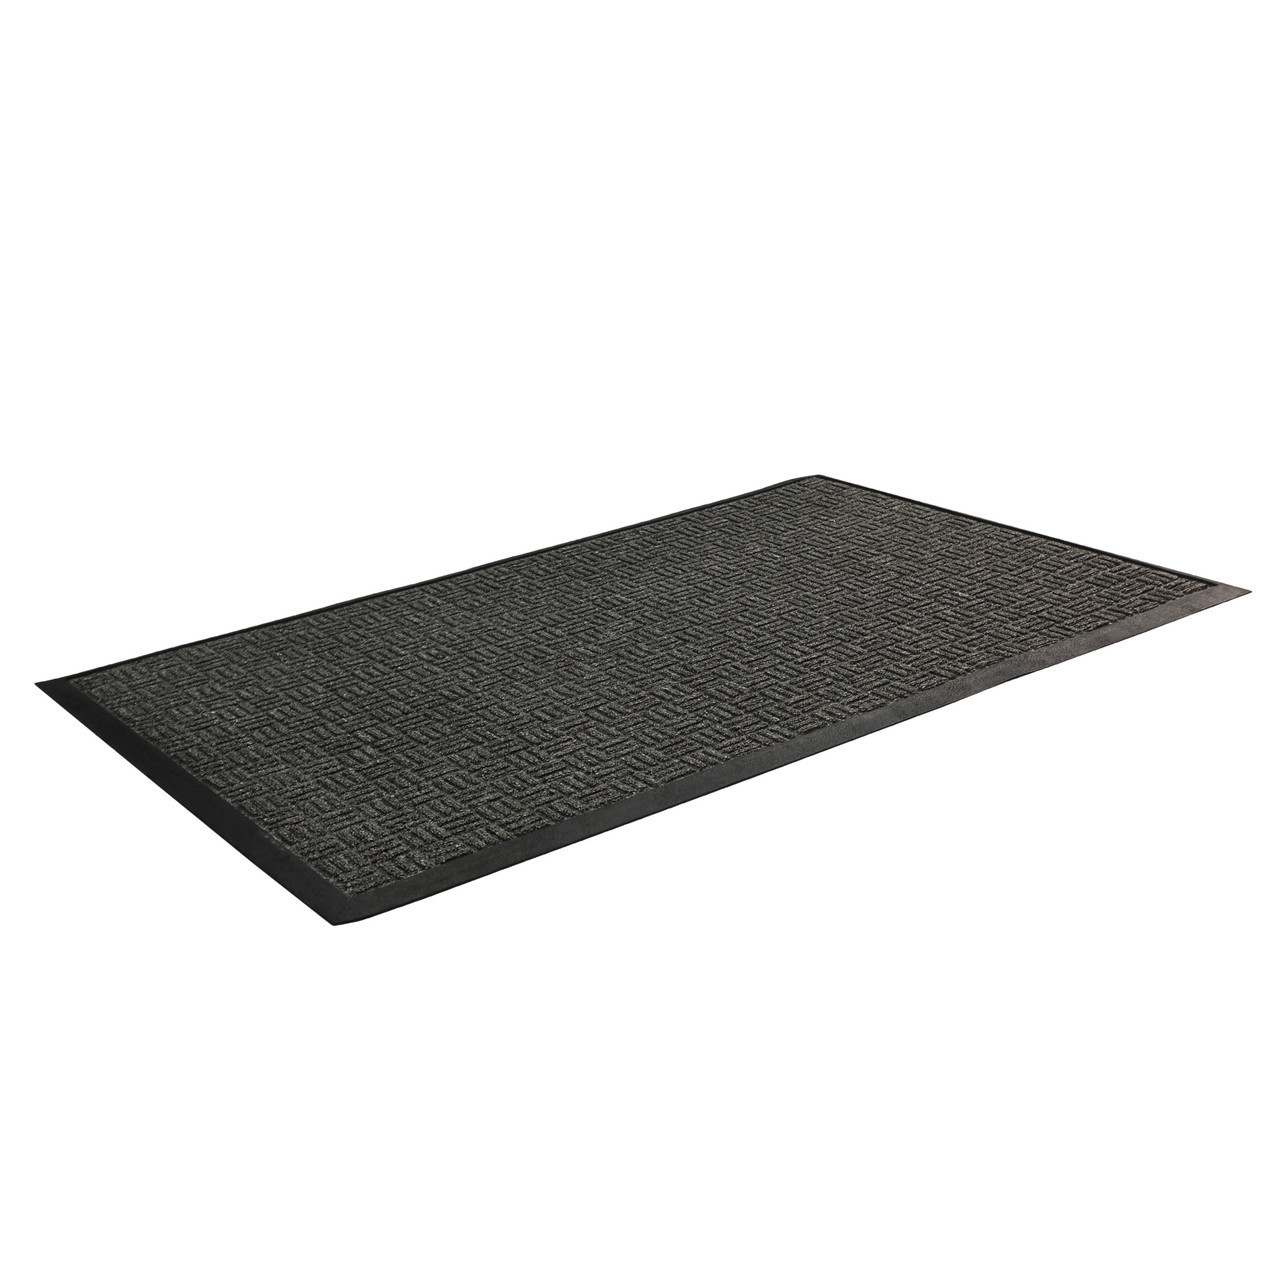 https://cdn11.bigcommerce.com/s-fjwps1jbkv/images/stencil/1280x1280/products/151/3382/ultralux-premium-indoor-outdoor-entrance-mat-or-absorbent-strong-anti-slip-entry-rug-heavy-duty-doormat-or-dark-gray__32644.1688991164.jpg?c=2?imbypass=on